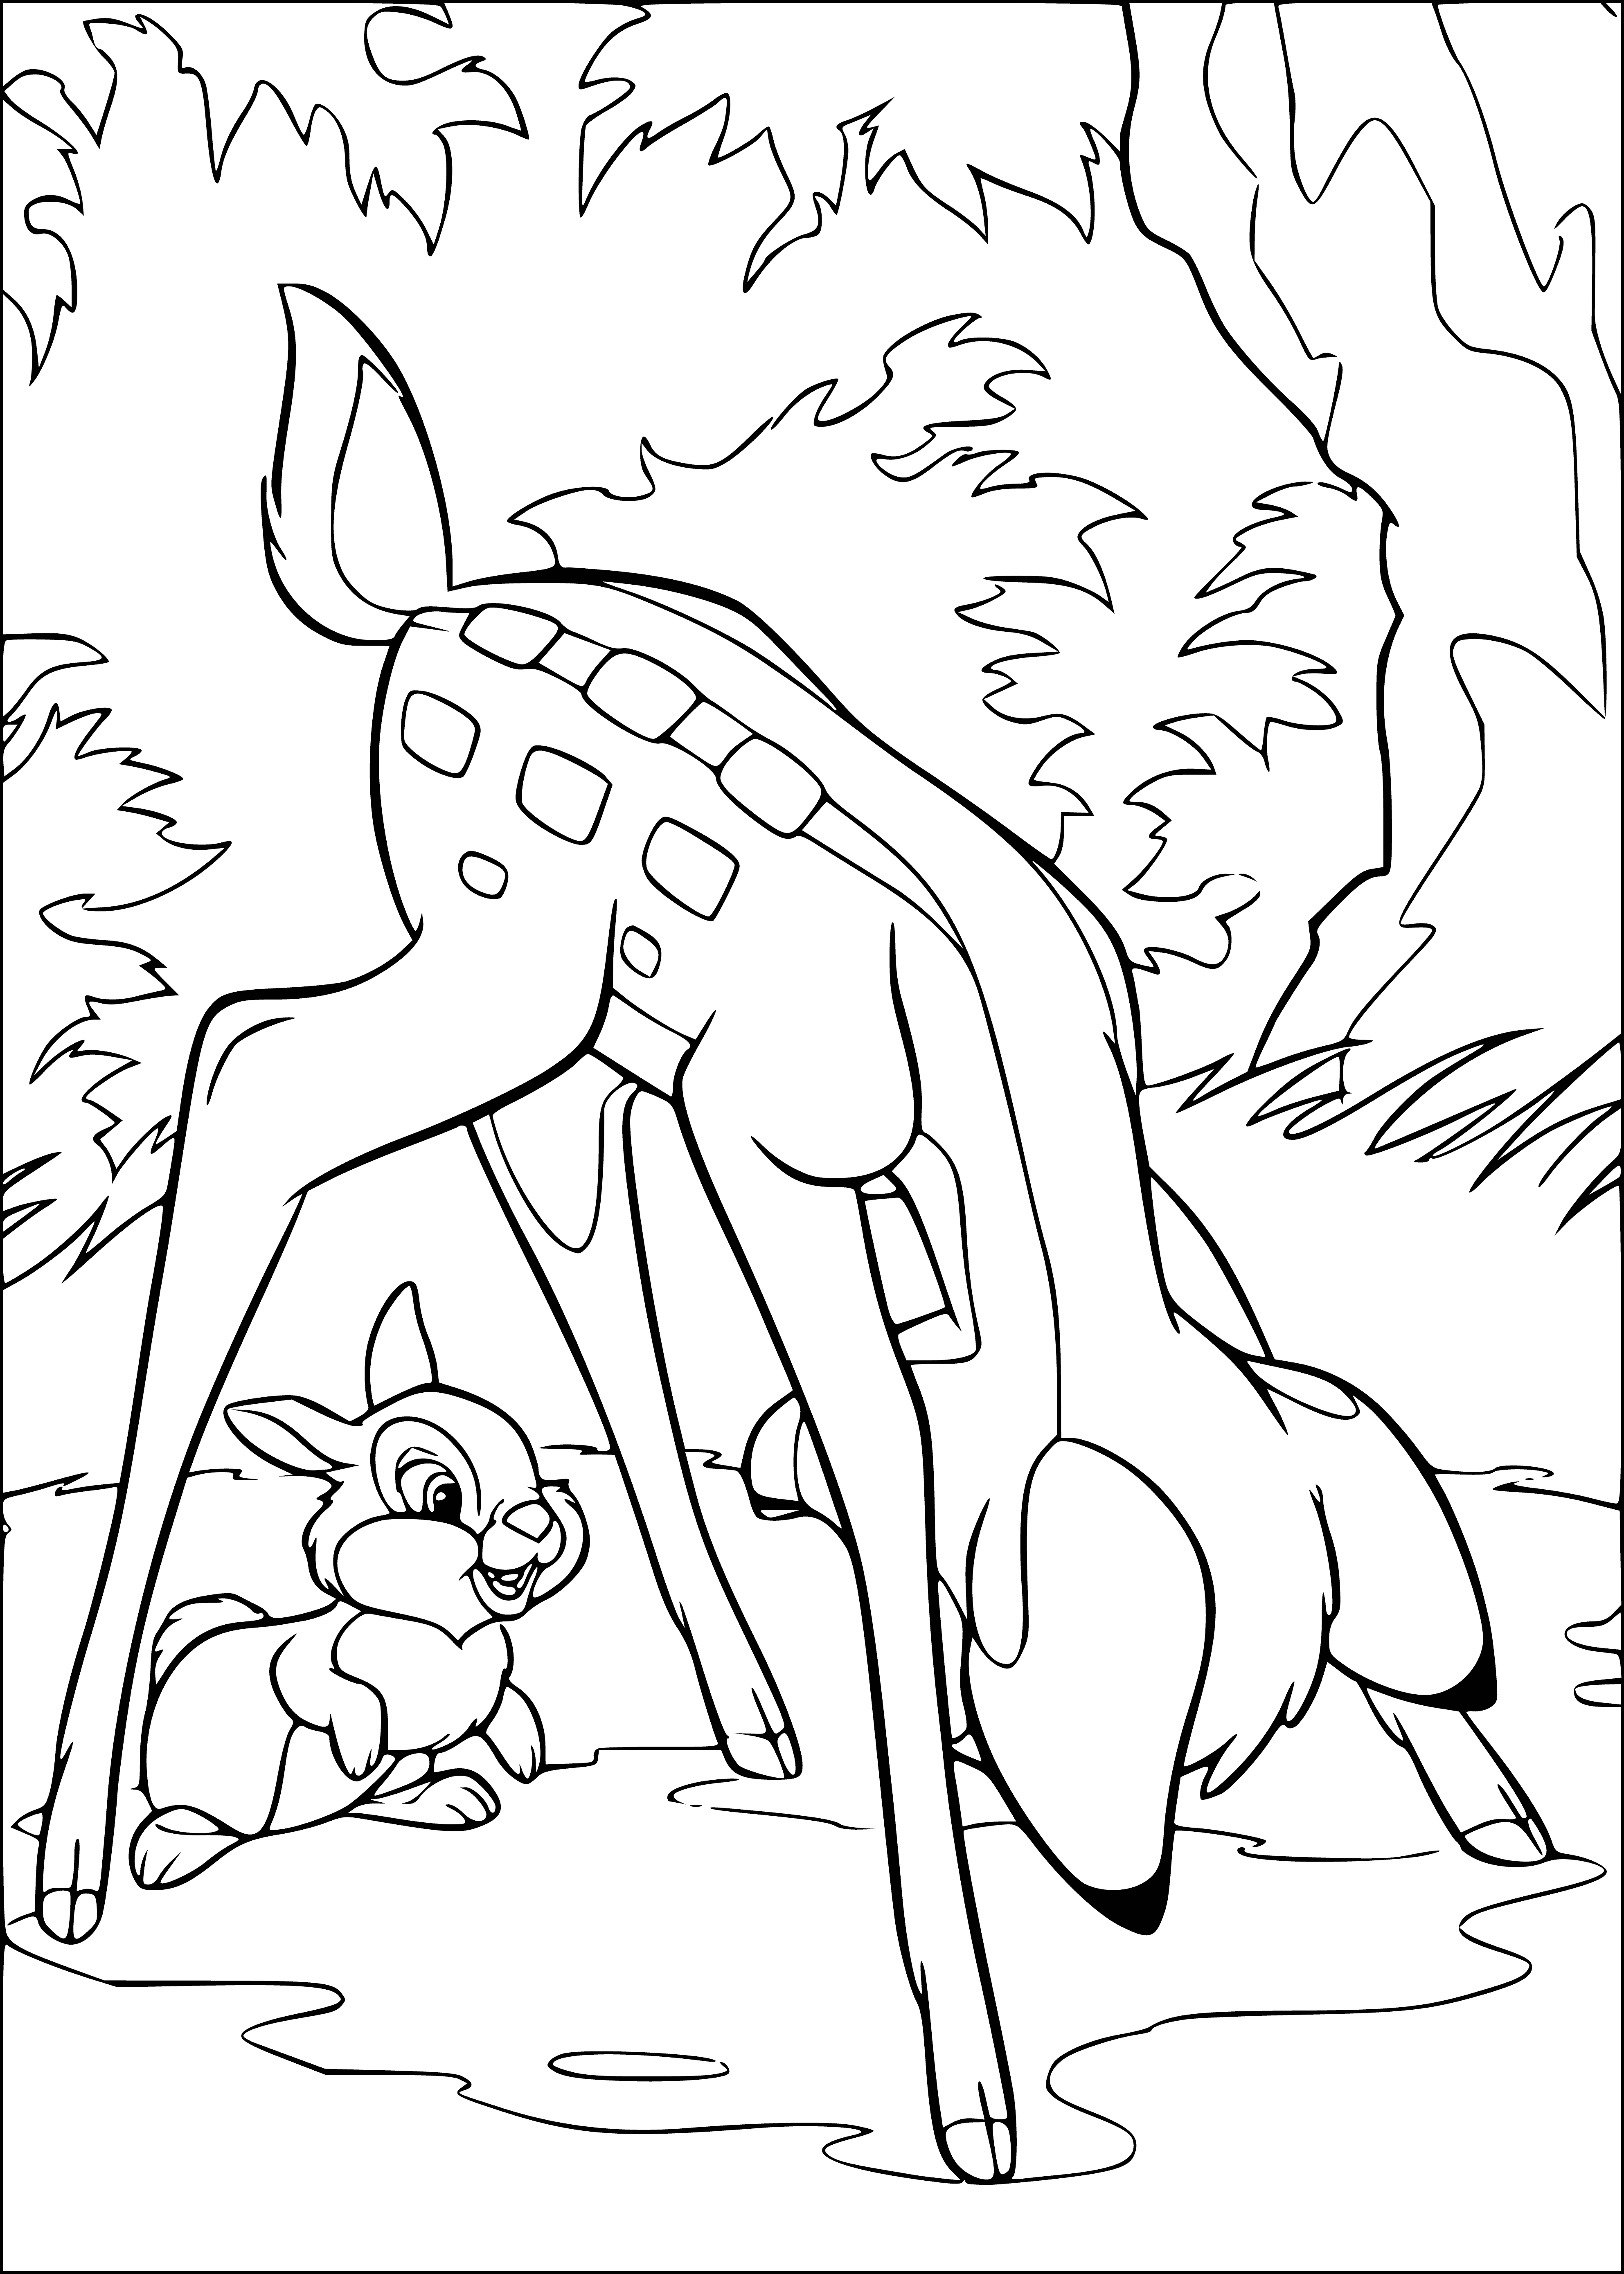 coloring page: Two brown mammals - Bambi & hare - stand & sit, looking like they're about to touch noses in a cute coloring page.